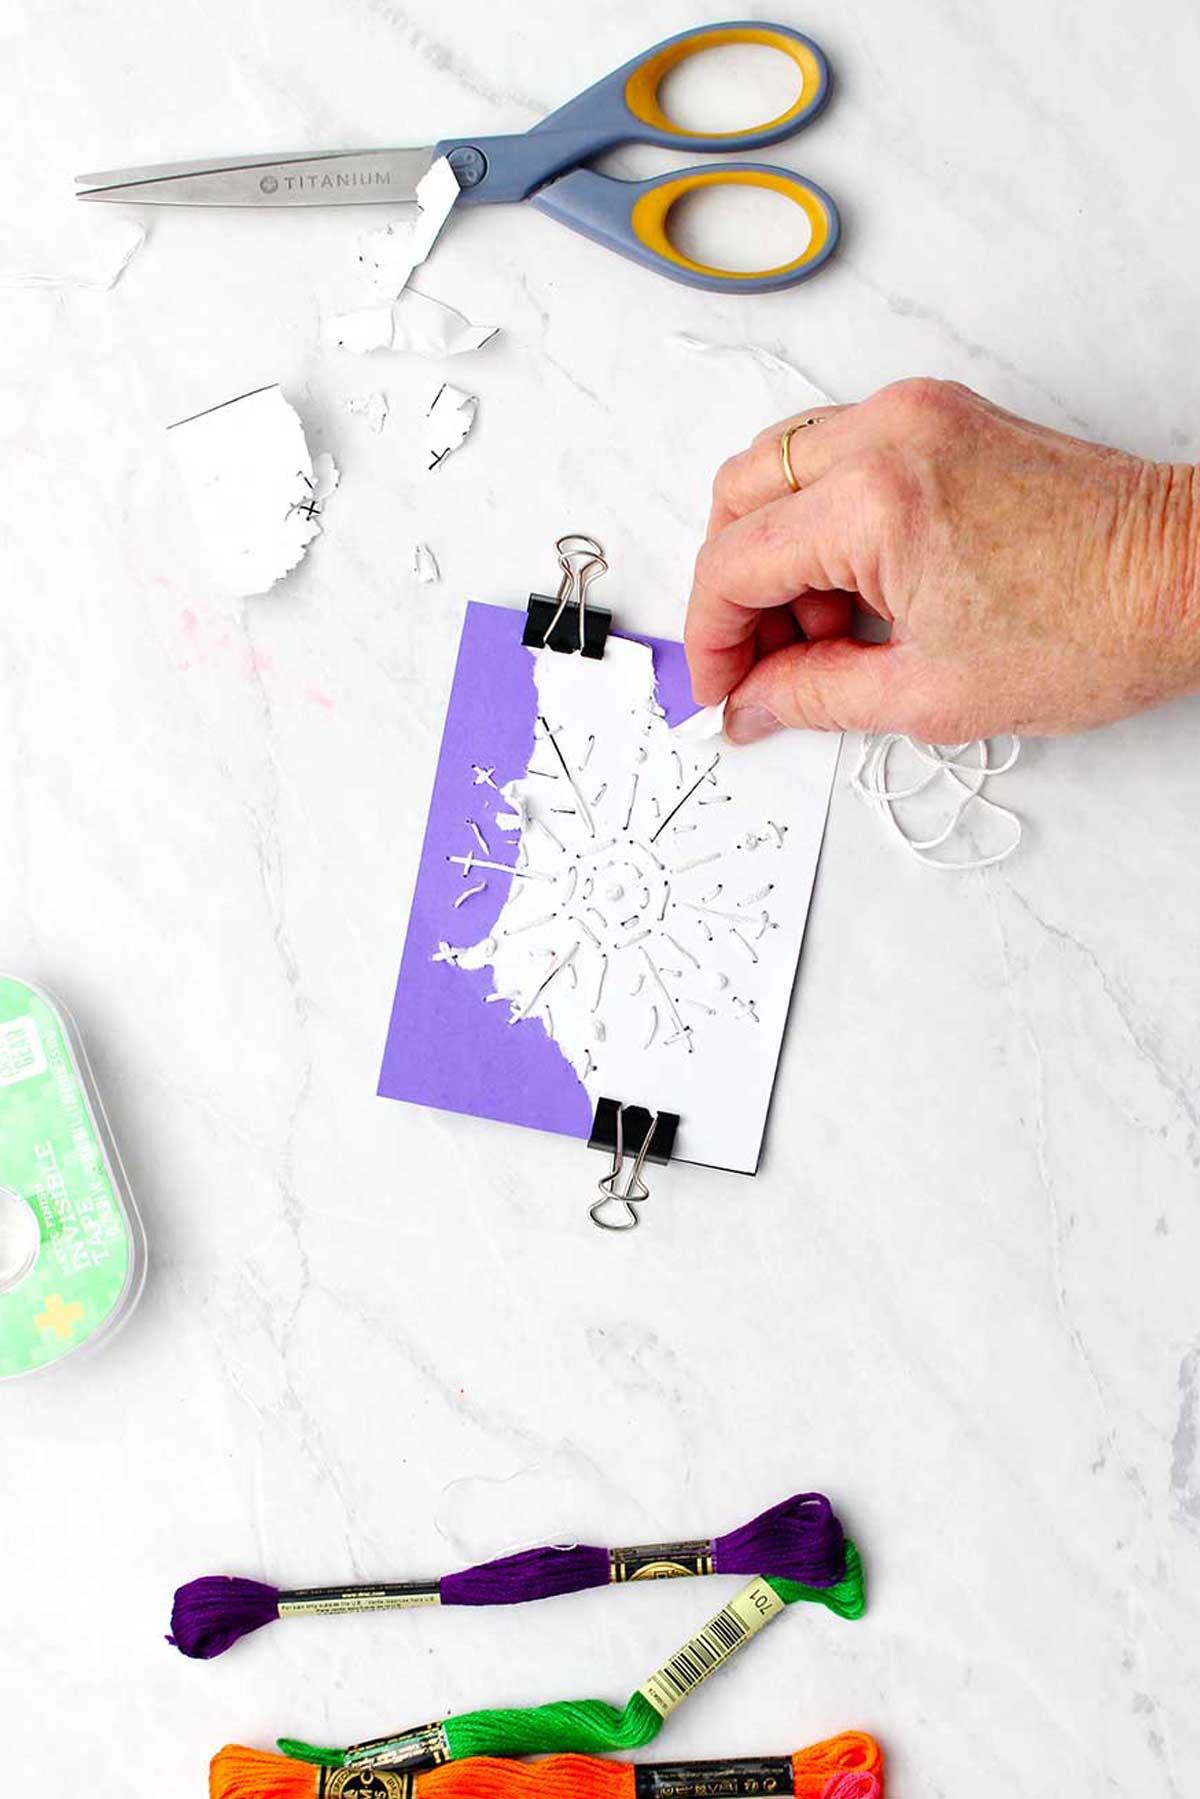 Hand ripping off the white paper snowflake template from the purple card.